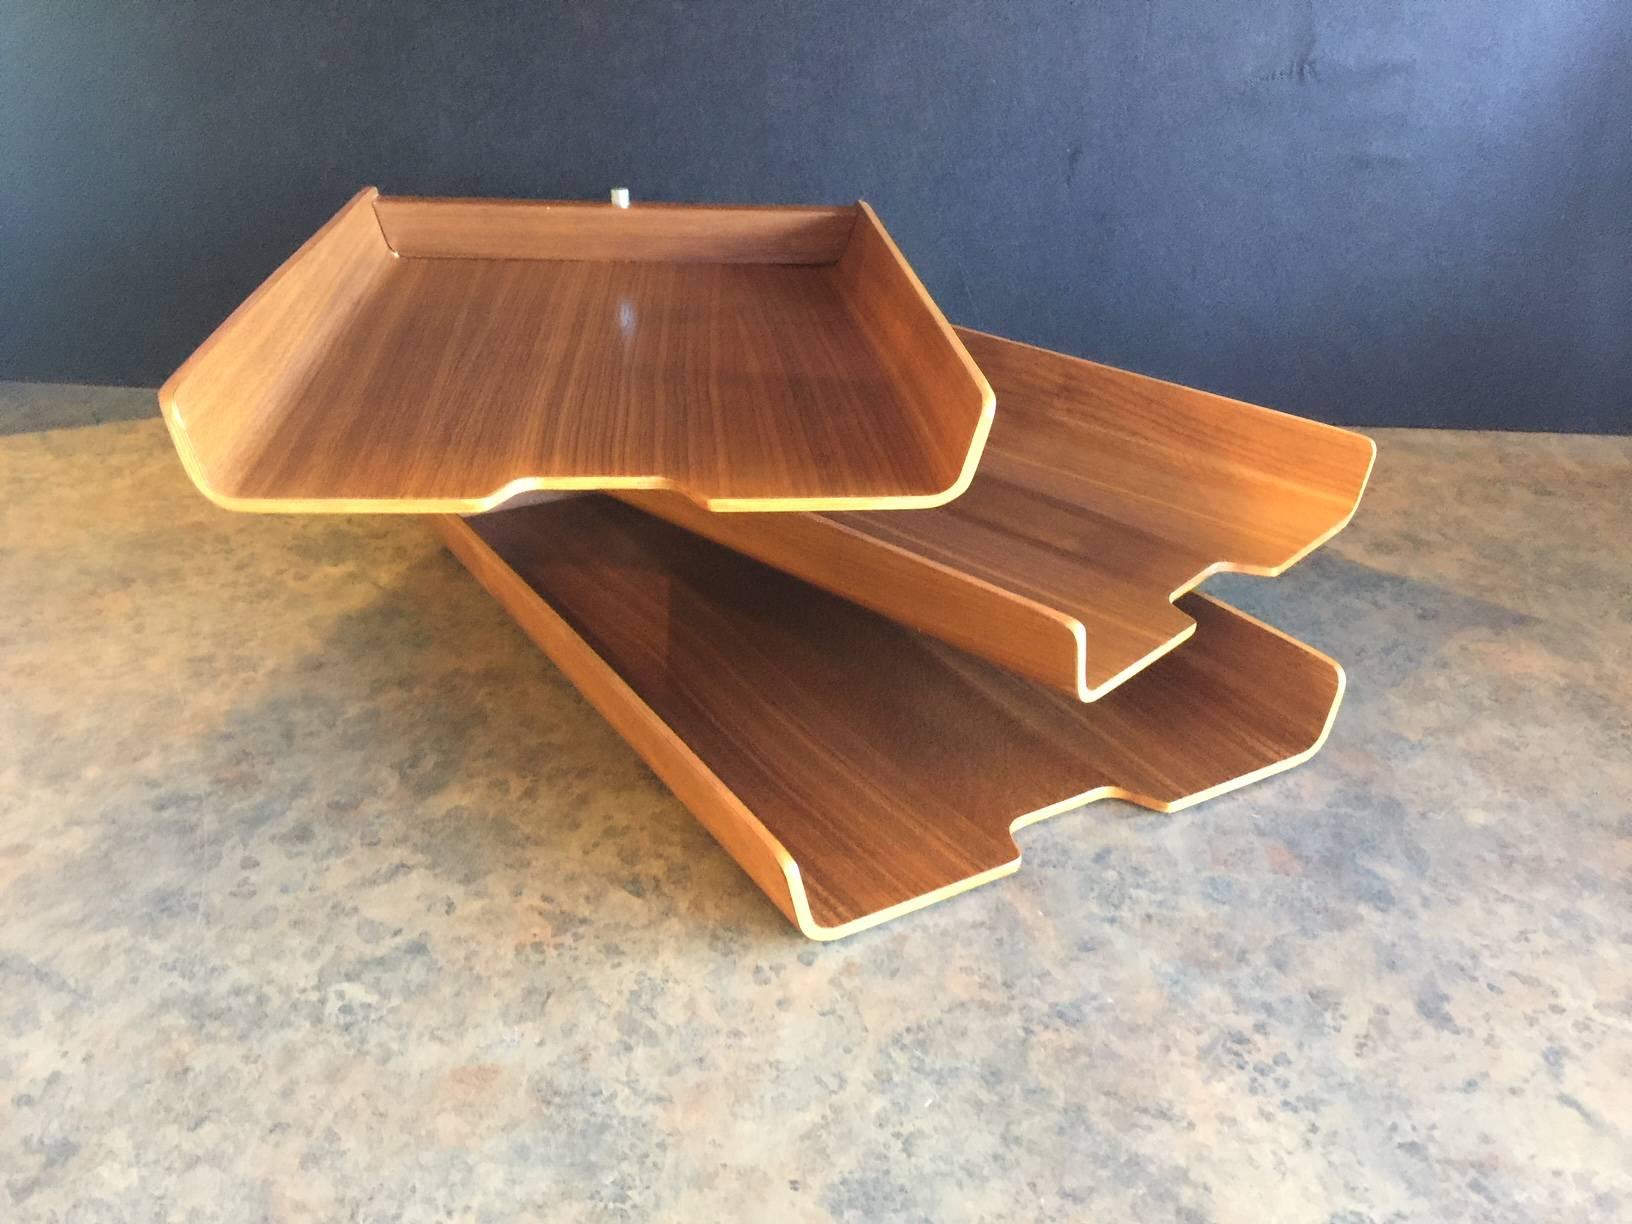 Very cool and functional triple letter tray by Martin Aberg for Rainbow Wood Products Company of Sweden, circa 1960s. The trays are made of molded teak plywood and can swivel into any number of configurations to meet your office needs. The set is in